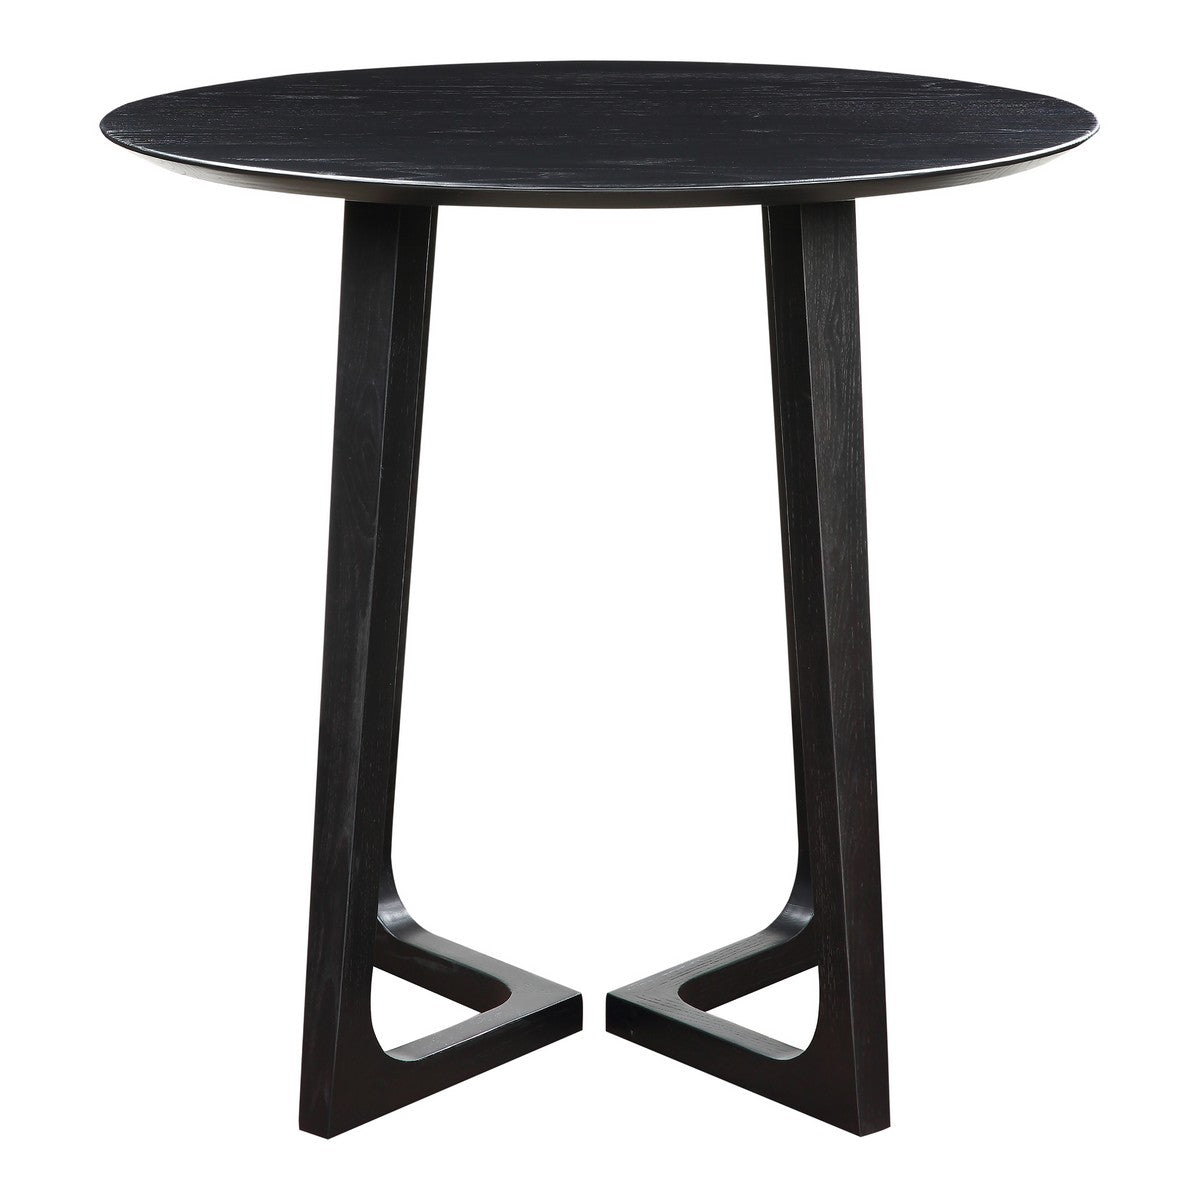 Moe's Home Collection Godenza Bar Table Black Ash - BC-1089-02 - Moe's Home Collection - Bar Table - Minimal And Modern - 1